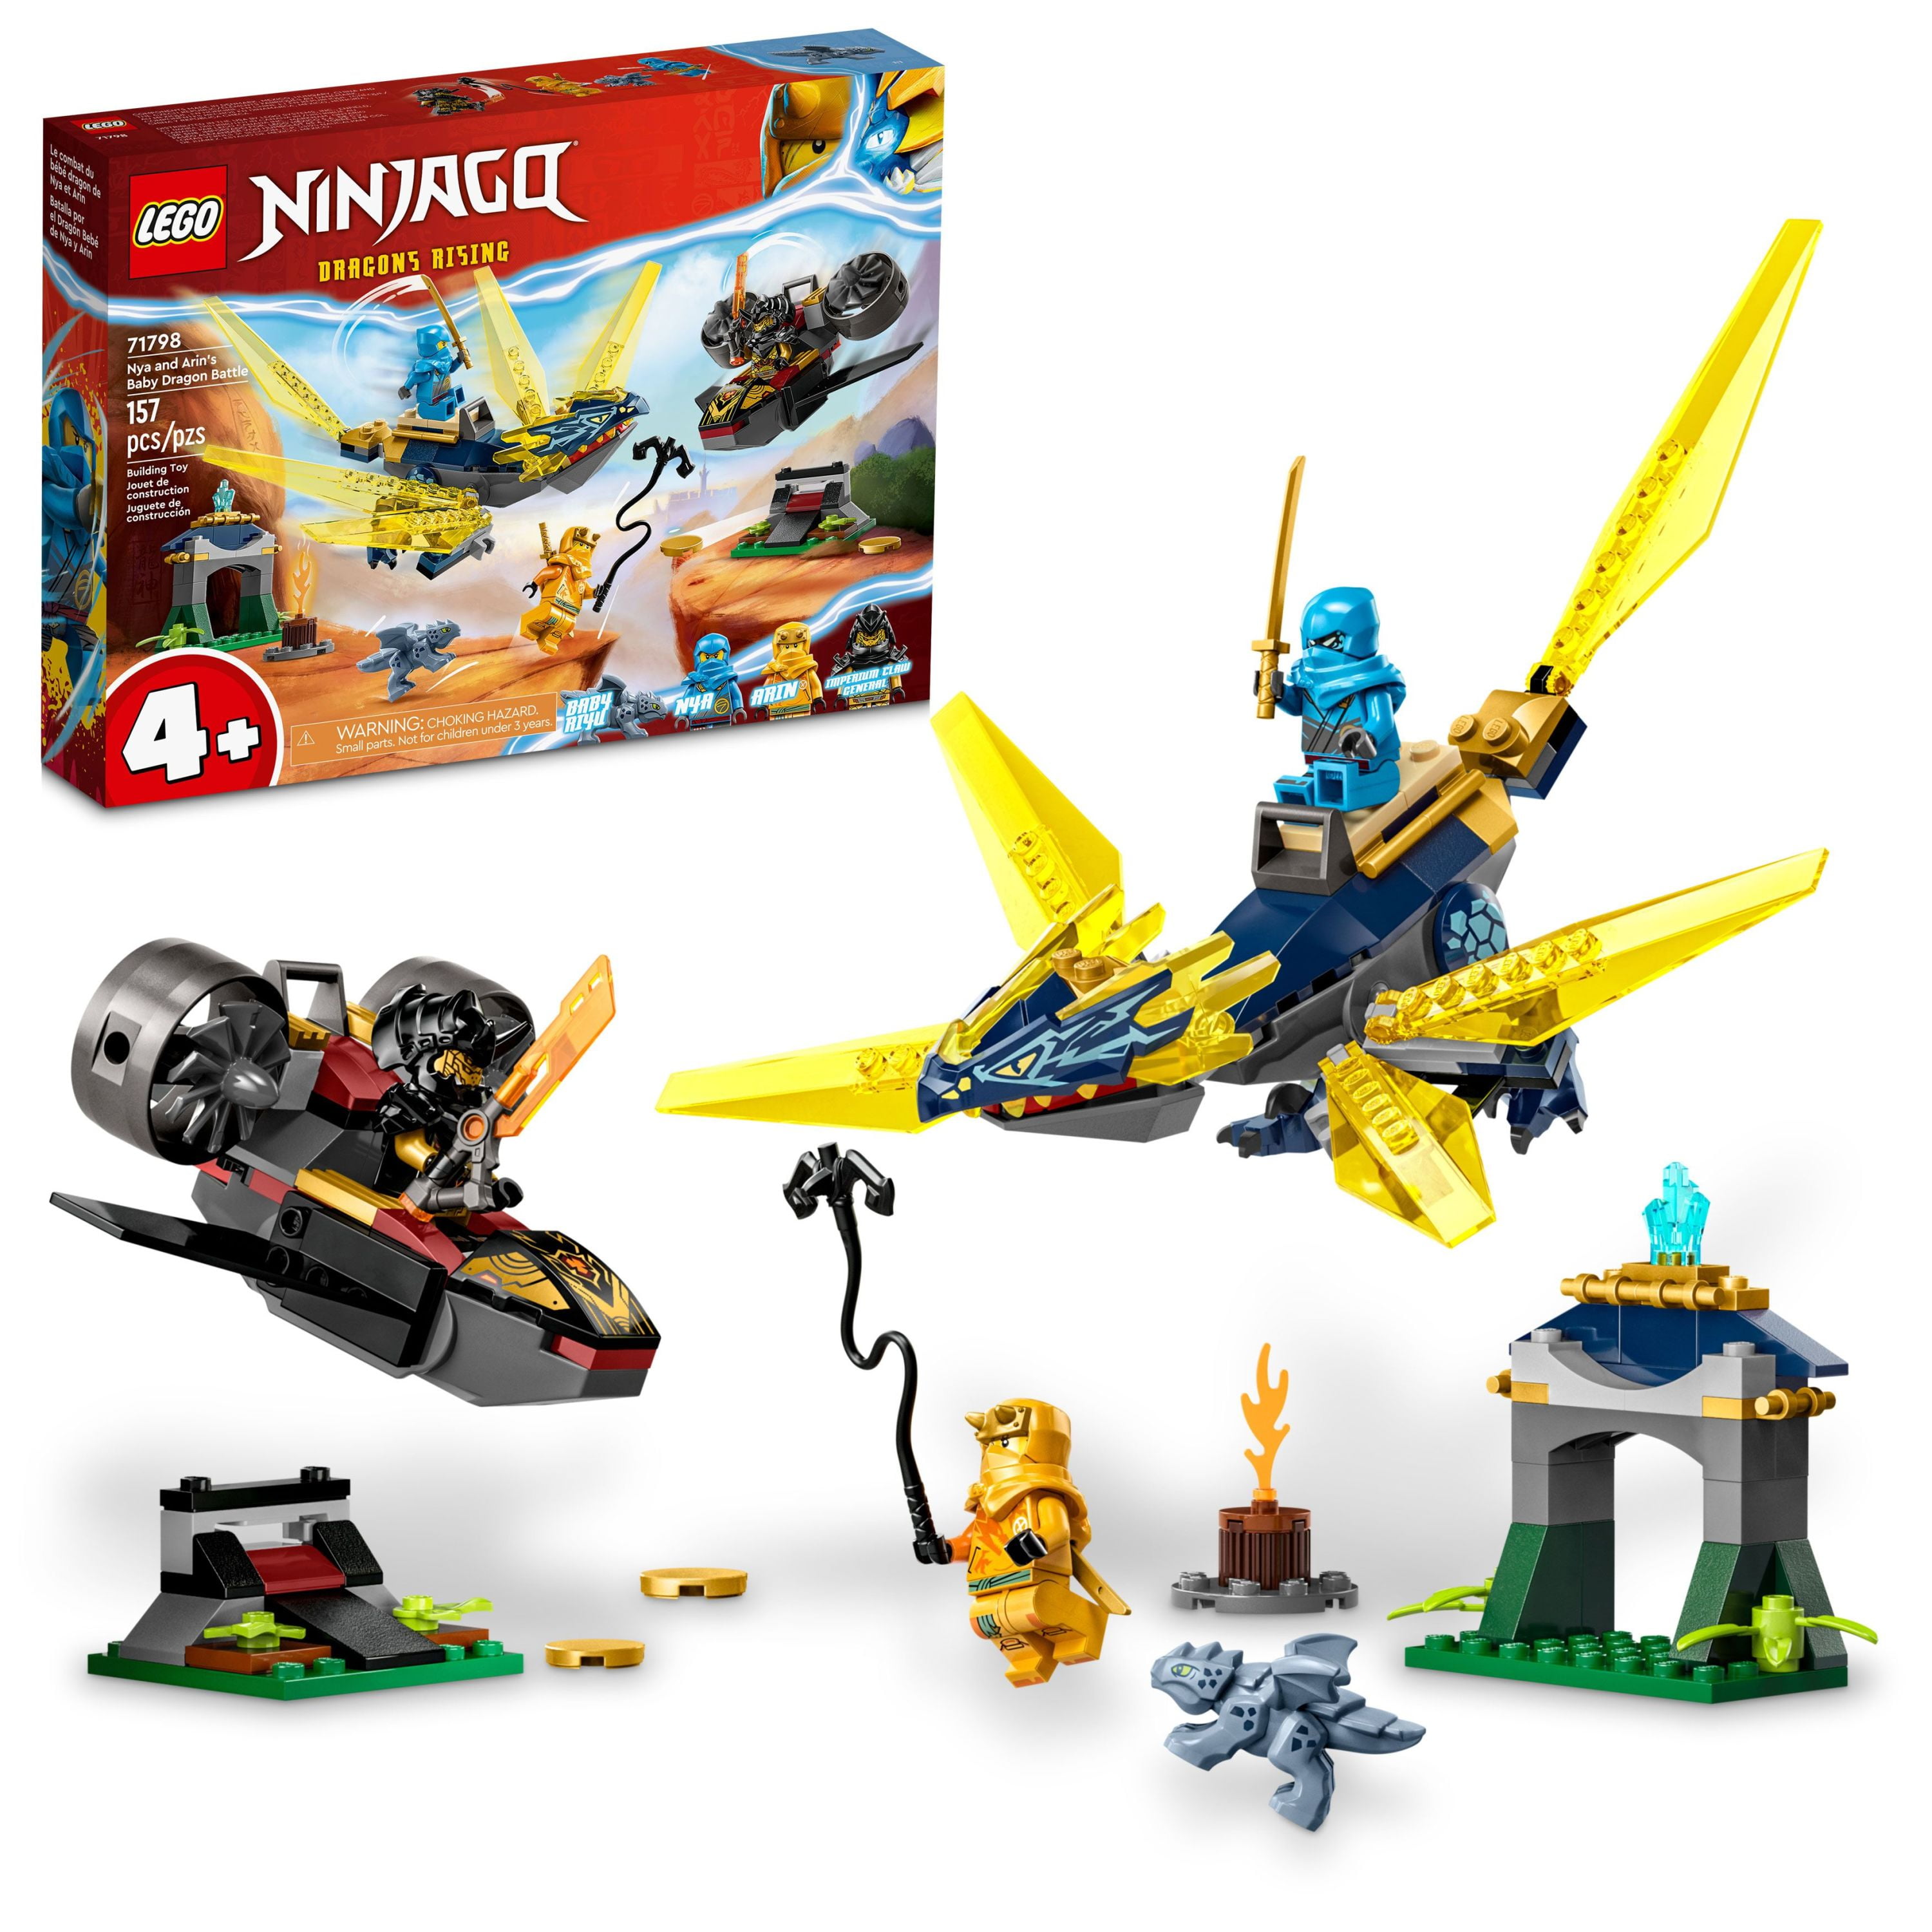 LEGO NINJAGO Nya and Arin's Baby Battle 71798 Ninja Toy, Features a Jet, 2 Dragons, 3 Minifigures and Riyu, Gift Idea for Toddlers Ages 4+ - Walmart.com